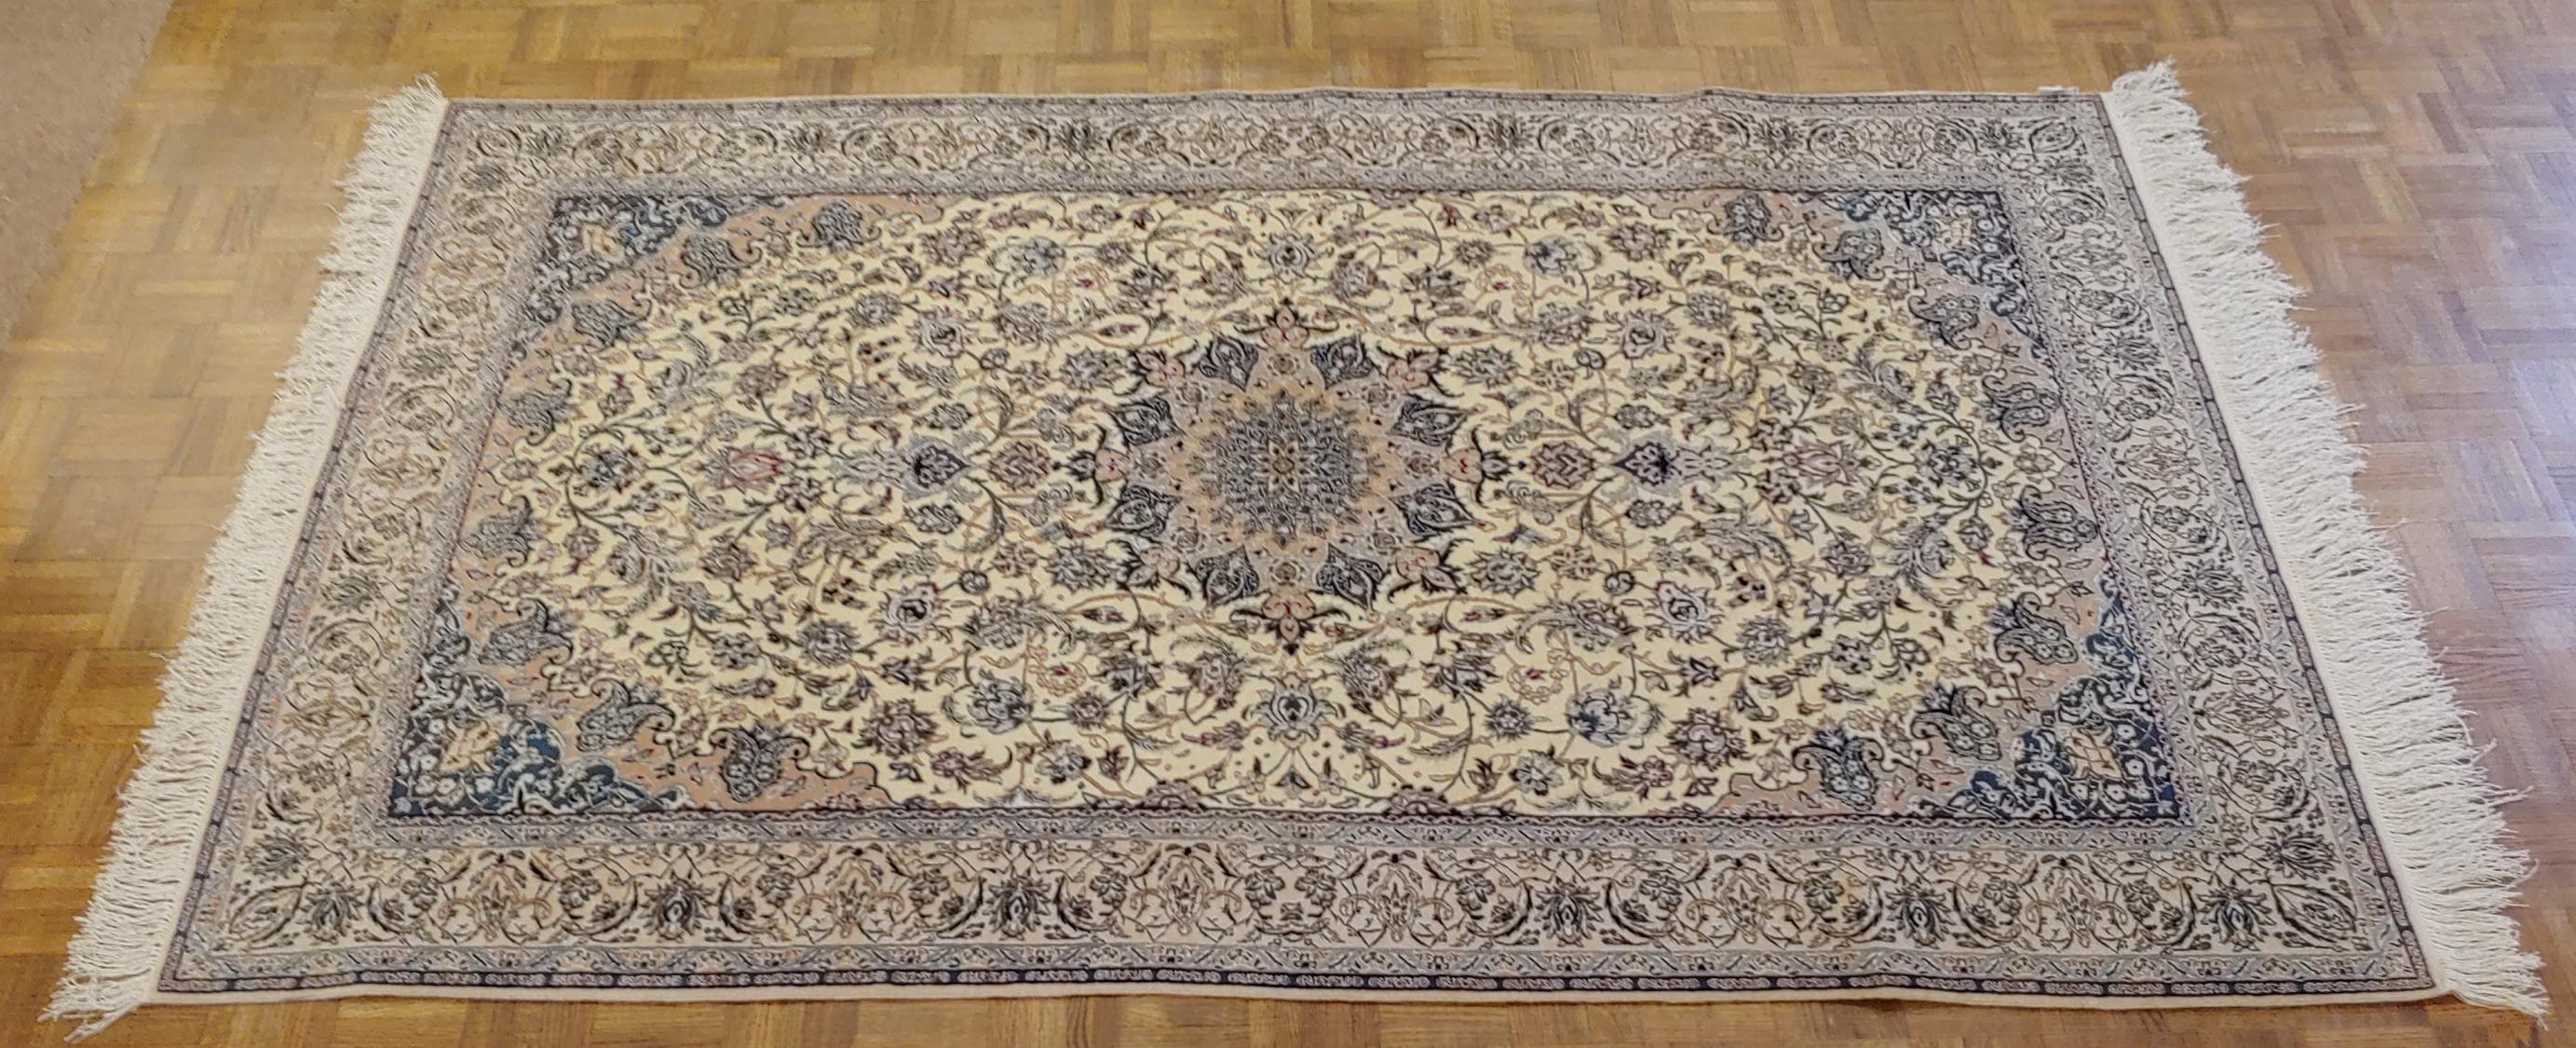 Extraordinary and very fine Persian Nain rug. Nain are known as one of the finest rugs woven in Persia. This particular rug has approximately 700 knots per square inch (kpsi). It is a wool pile with silk highlights woven on linen. It uses the